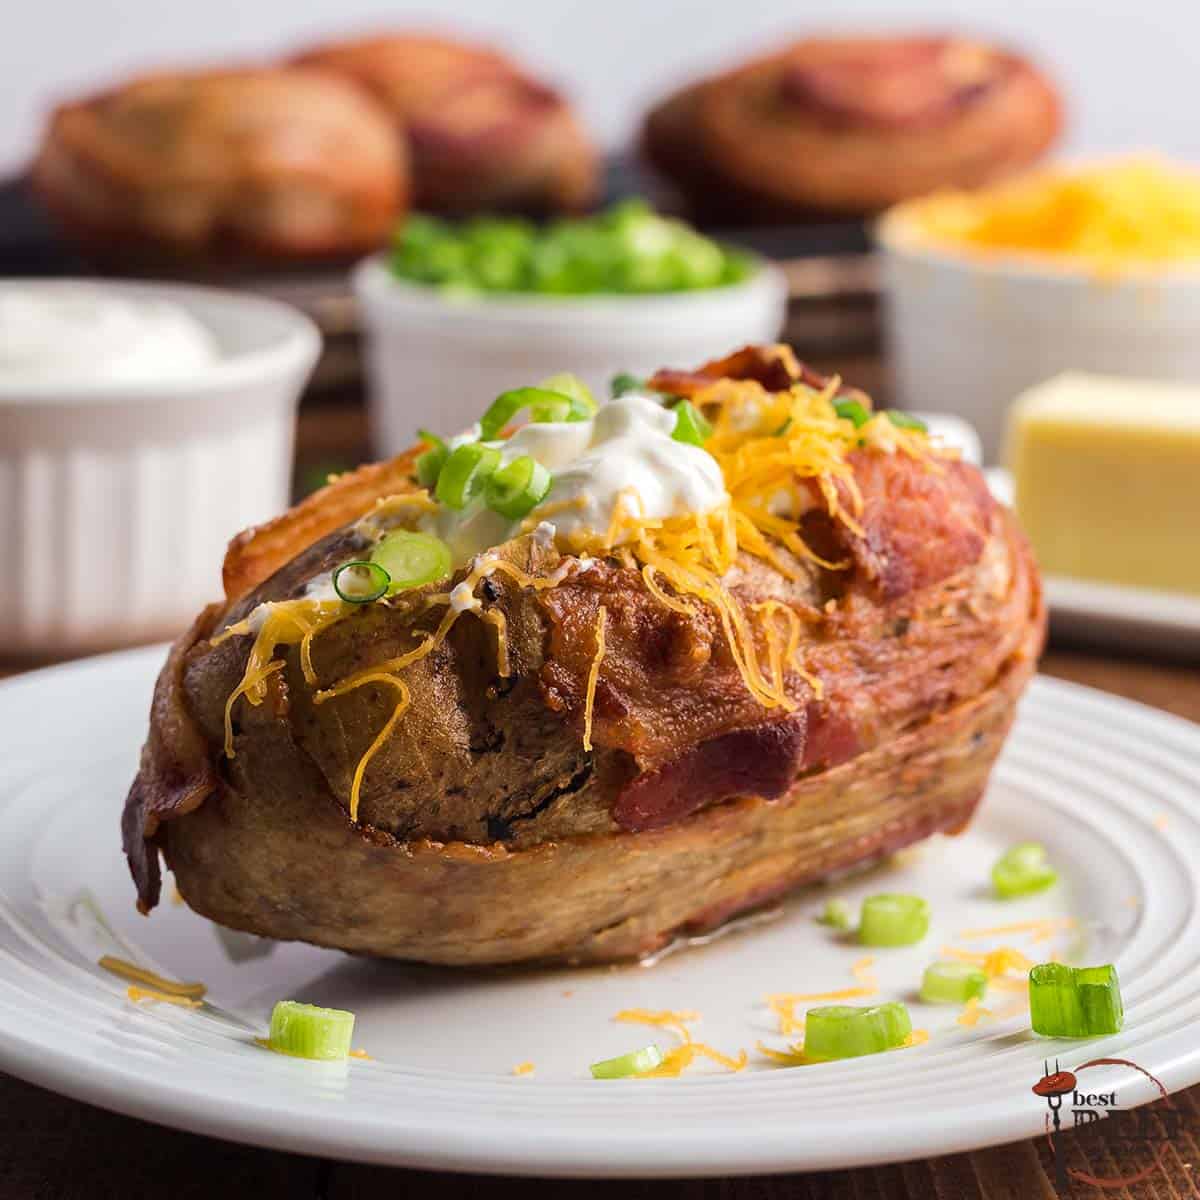 steakhouse baked potato wrapped in bacon and stuffed with sour cream, green onions, and cheese